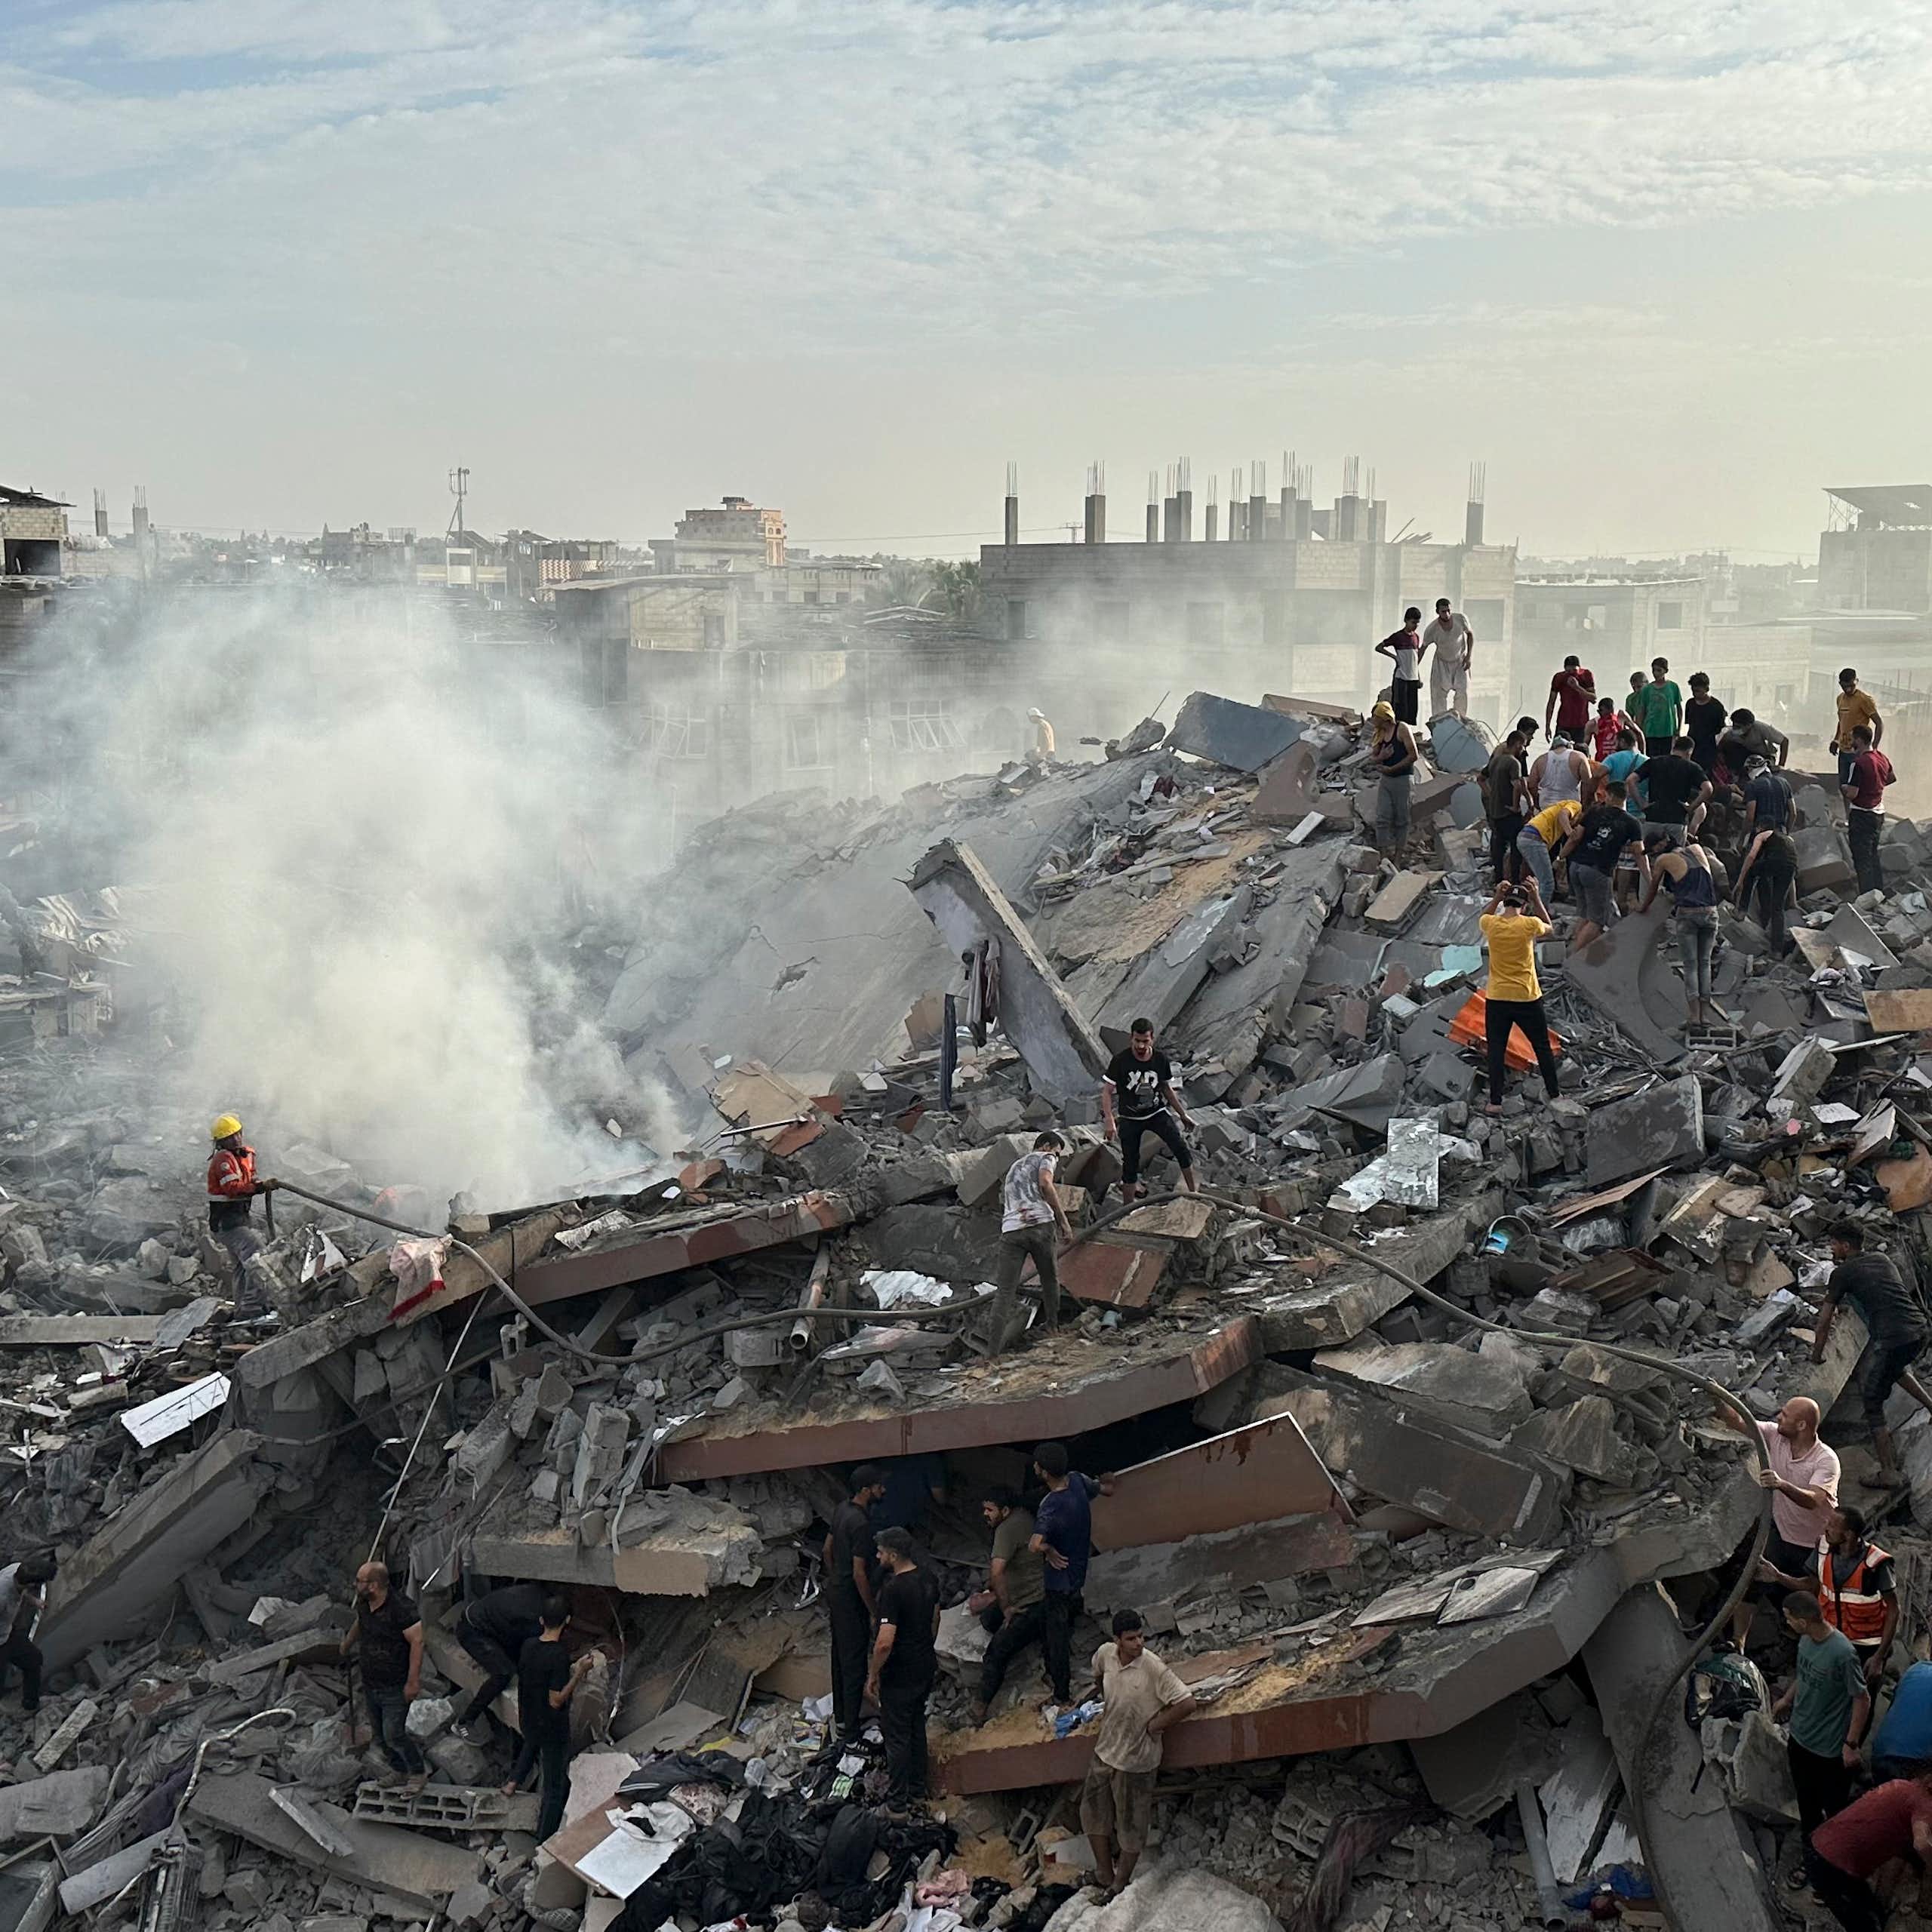 Workers and residents stand on a pile of rubble with one building standing in the background.